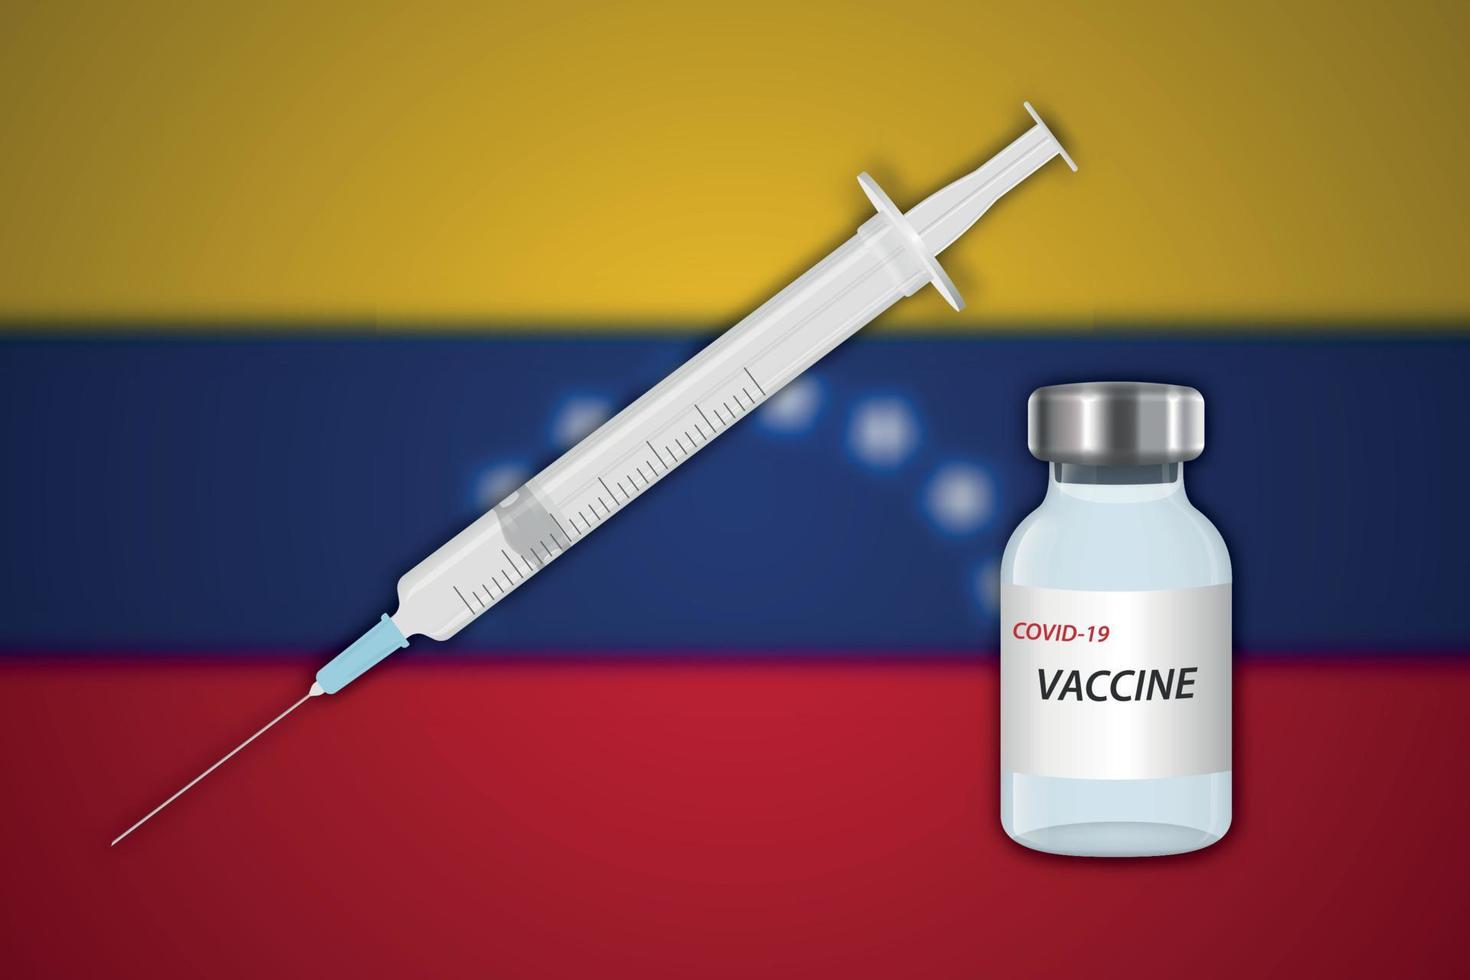 Syringe and vaccine vial on blur background with Venezuela flag vector